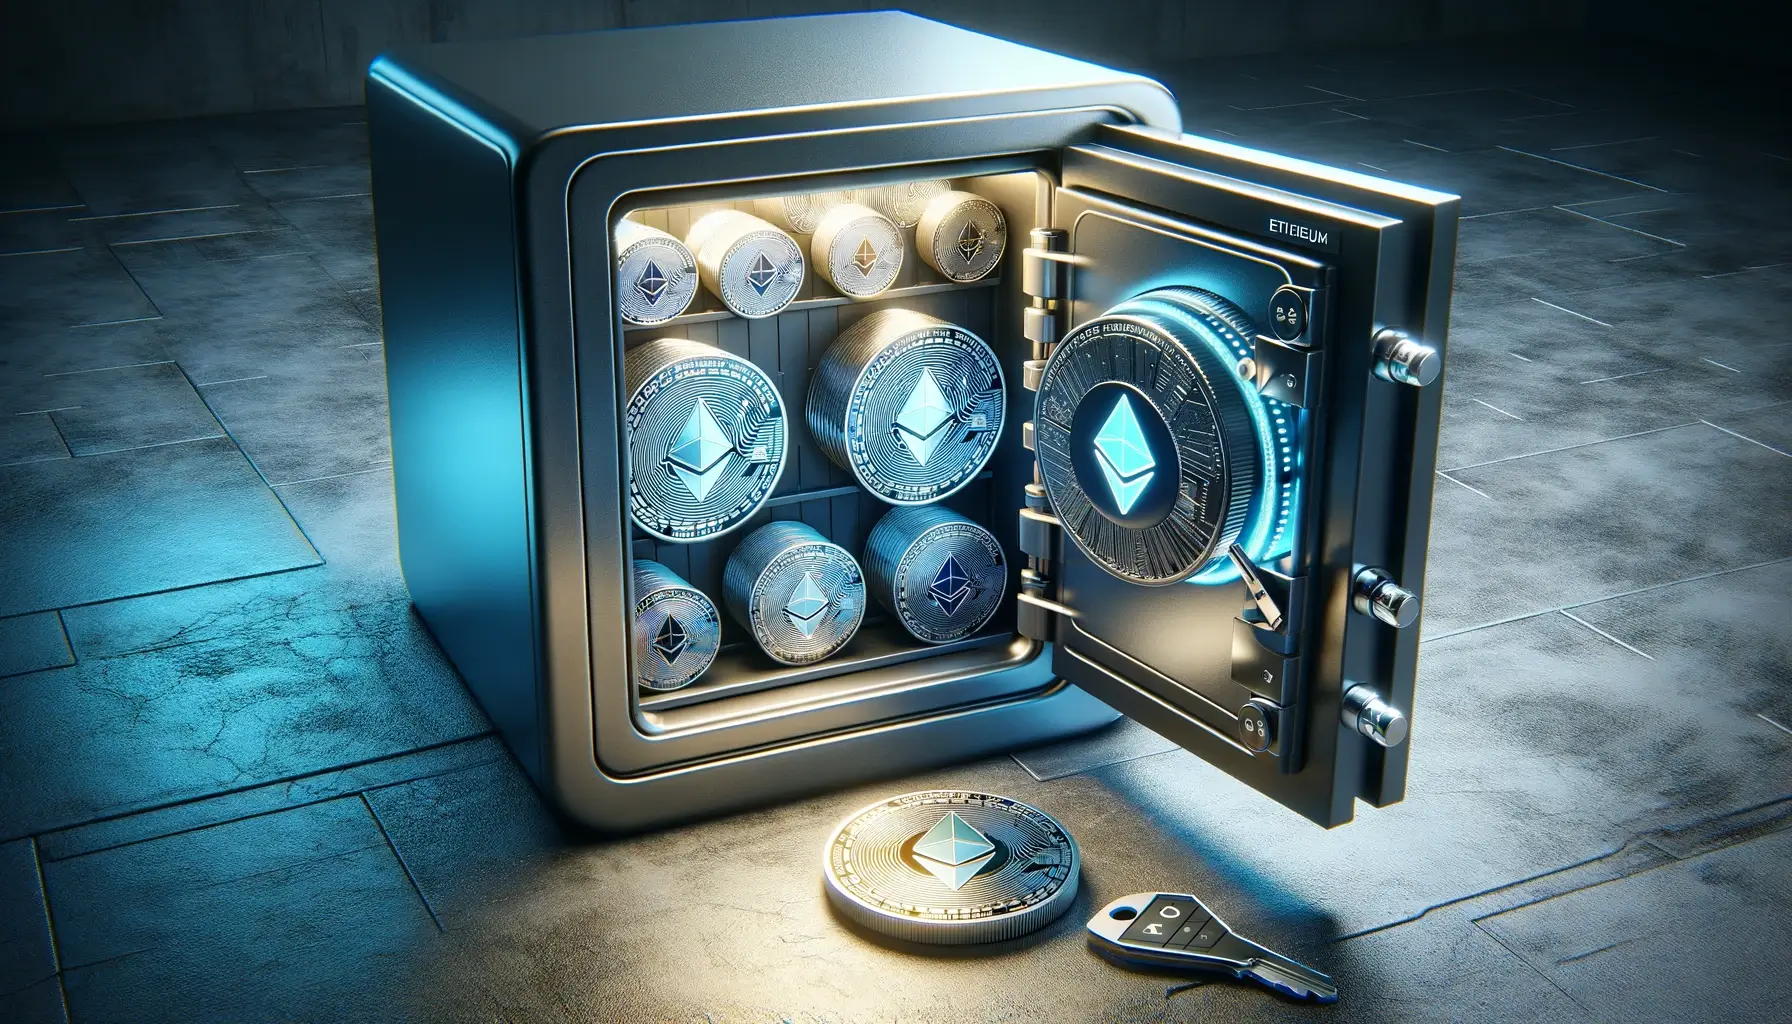 Steel safe open on textured floor revealing Ethereum coins and wallets, with digital key and Ethereum logo, in a blue and black high-tech setting.